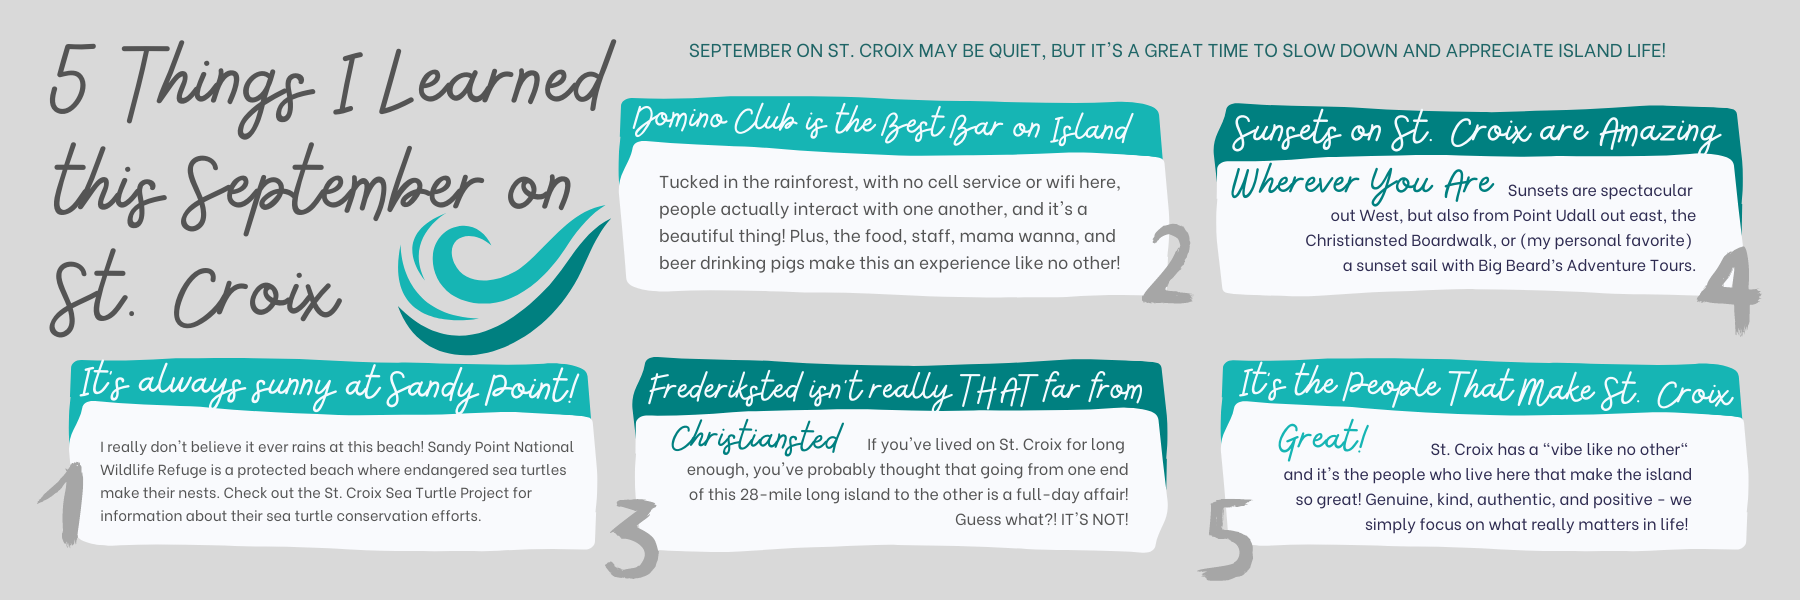 St. Croix in September: Five Things I Learned